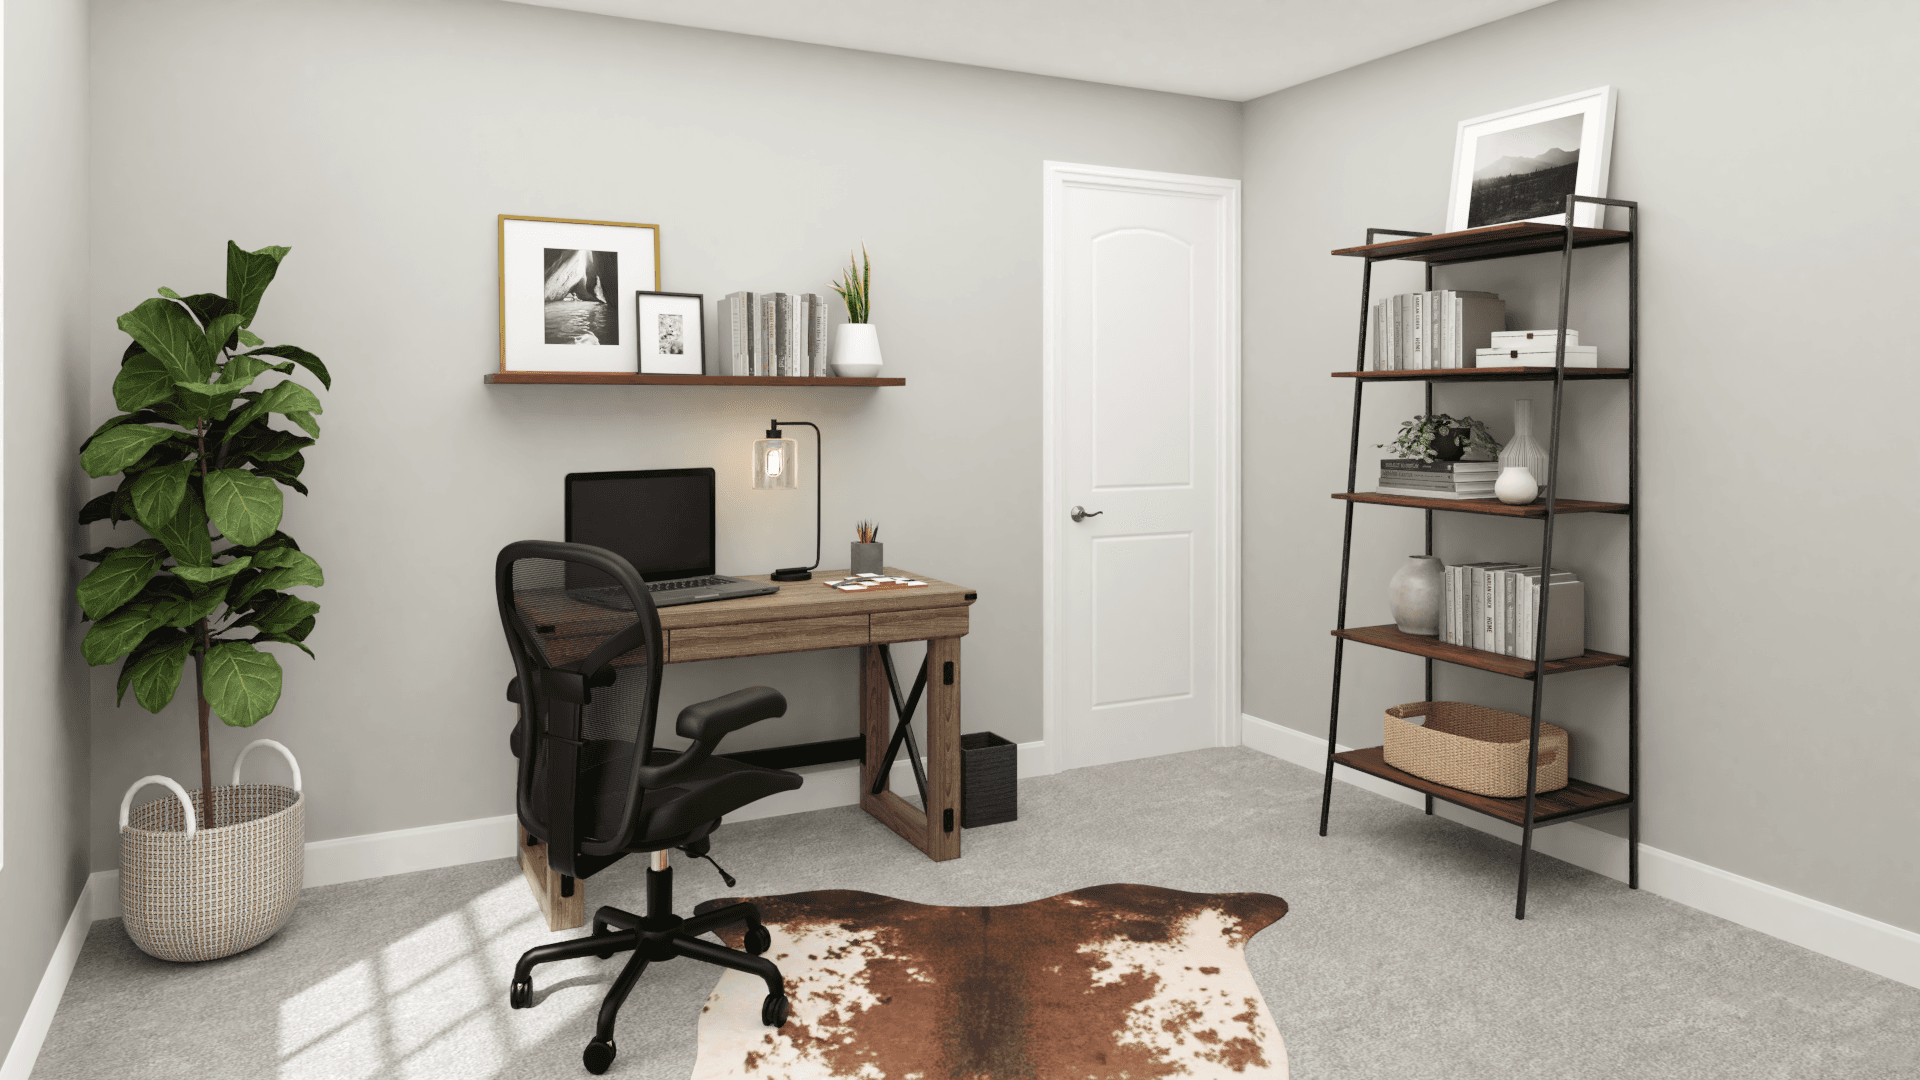 Masculine & Industrial: A Rustic Home Office